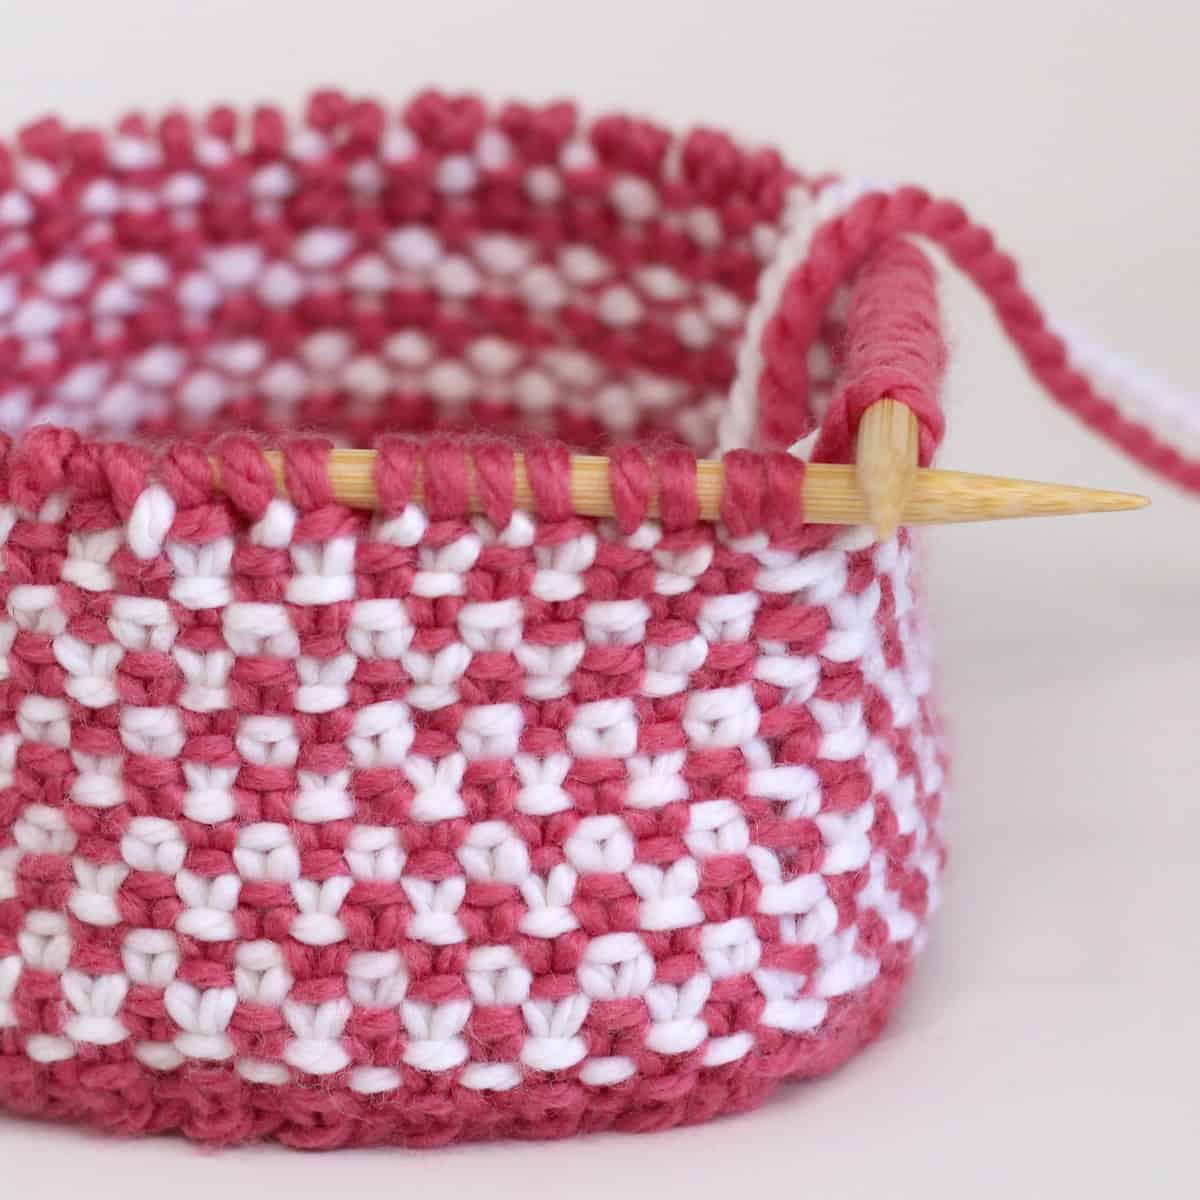 Linen stitch pattern knitted in the round on circular needles in pink and white yarn colors.